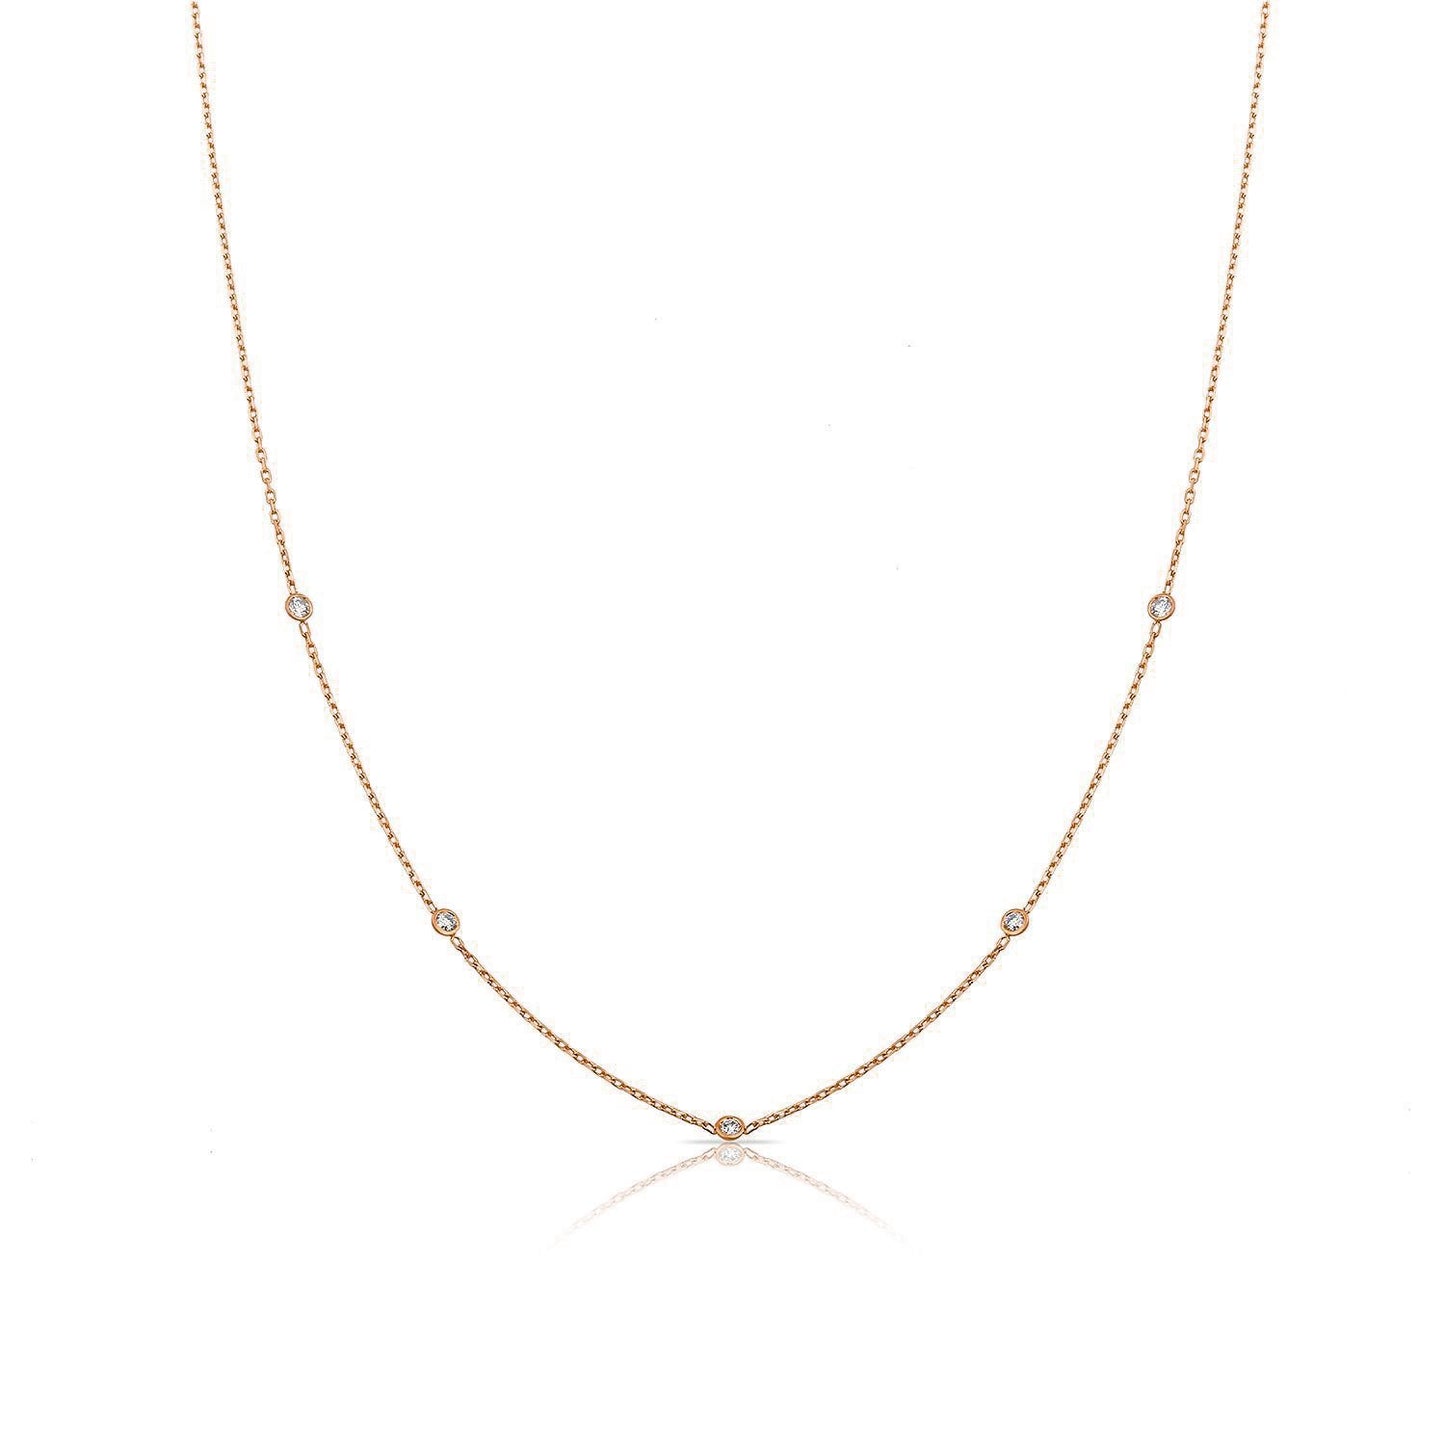 TSK Loverly Diamond Dotted Necklace JEWELRY The Sis Kiss 14k Gold